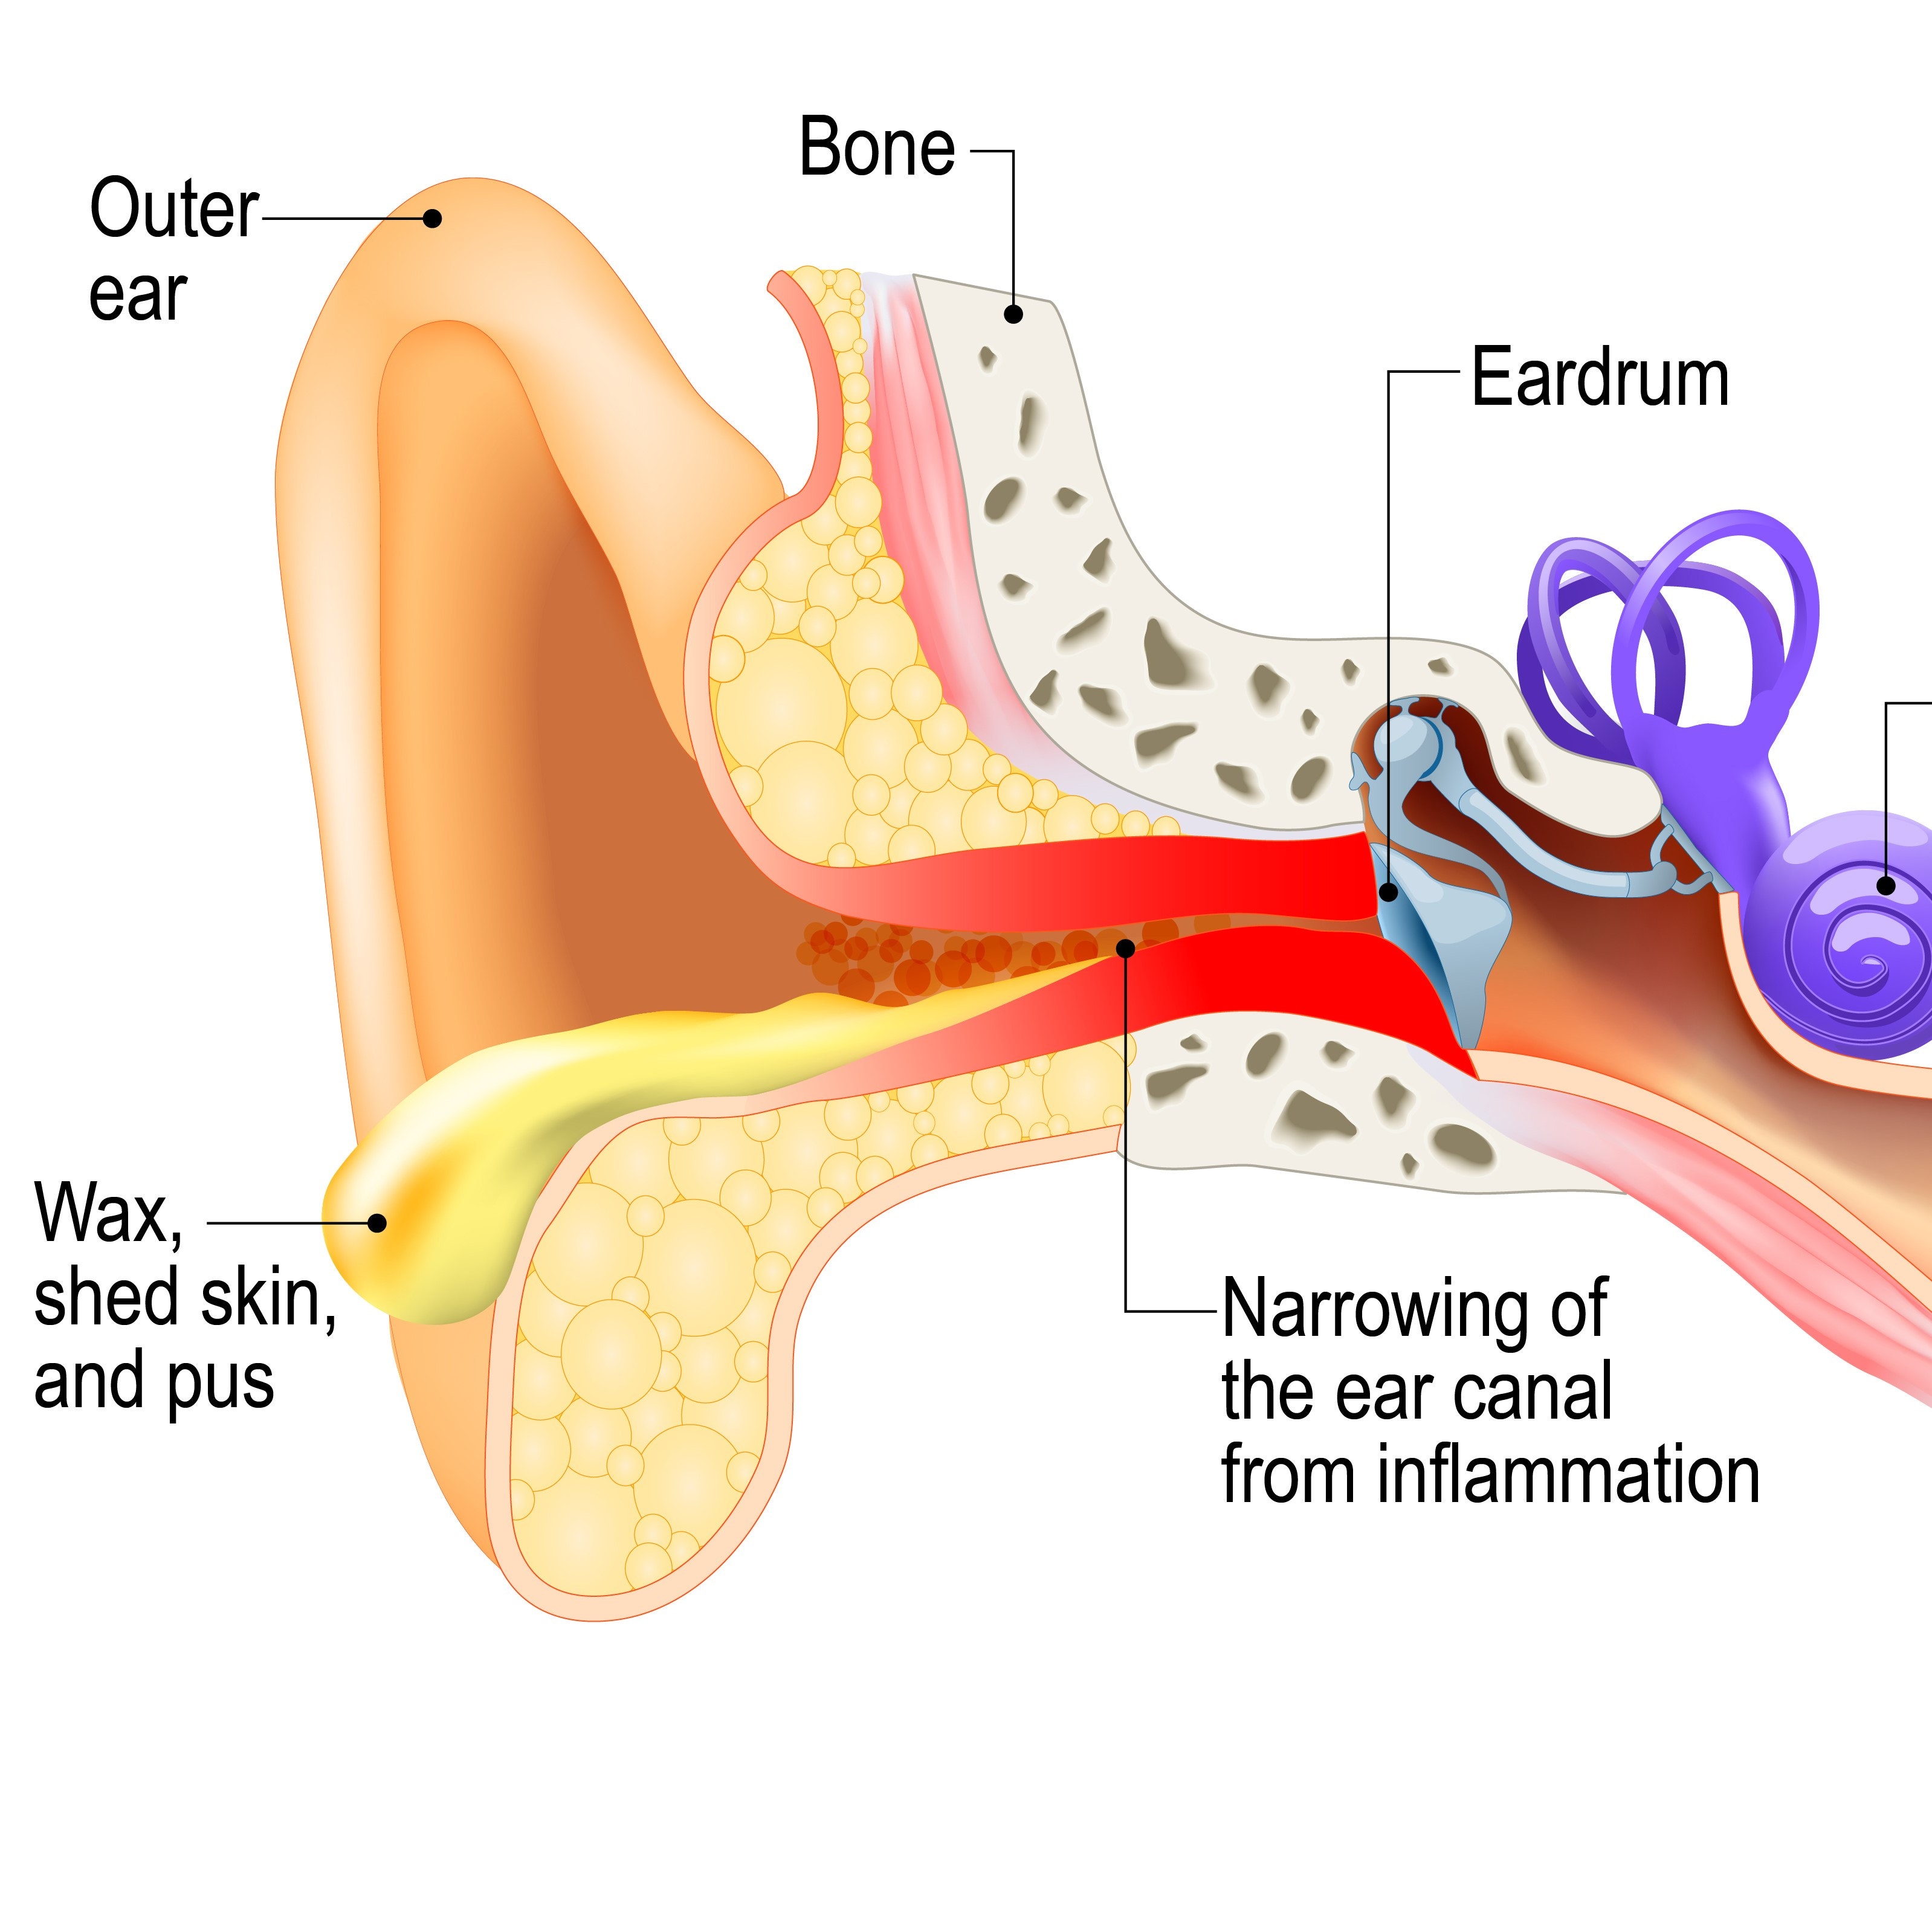 This illustration, depicting both the outer and inner ear, shows how the infection from swimmer's ear has narrowed the ear canal.